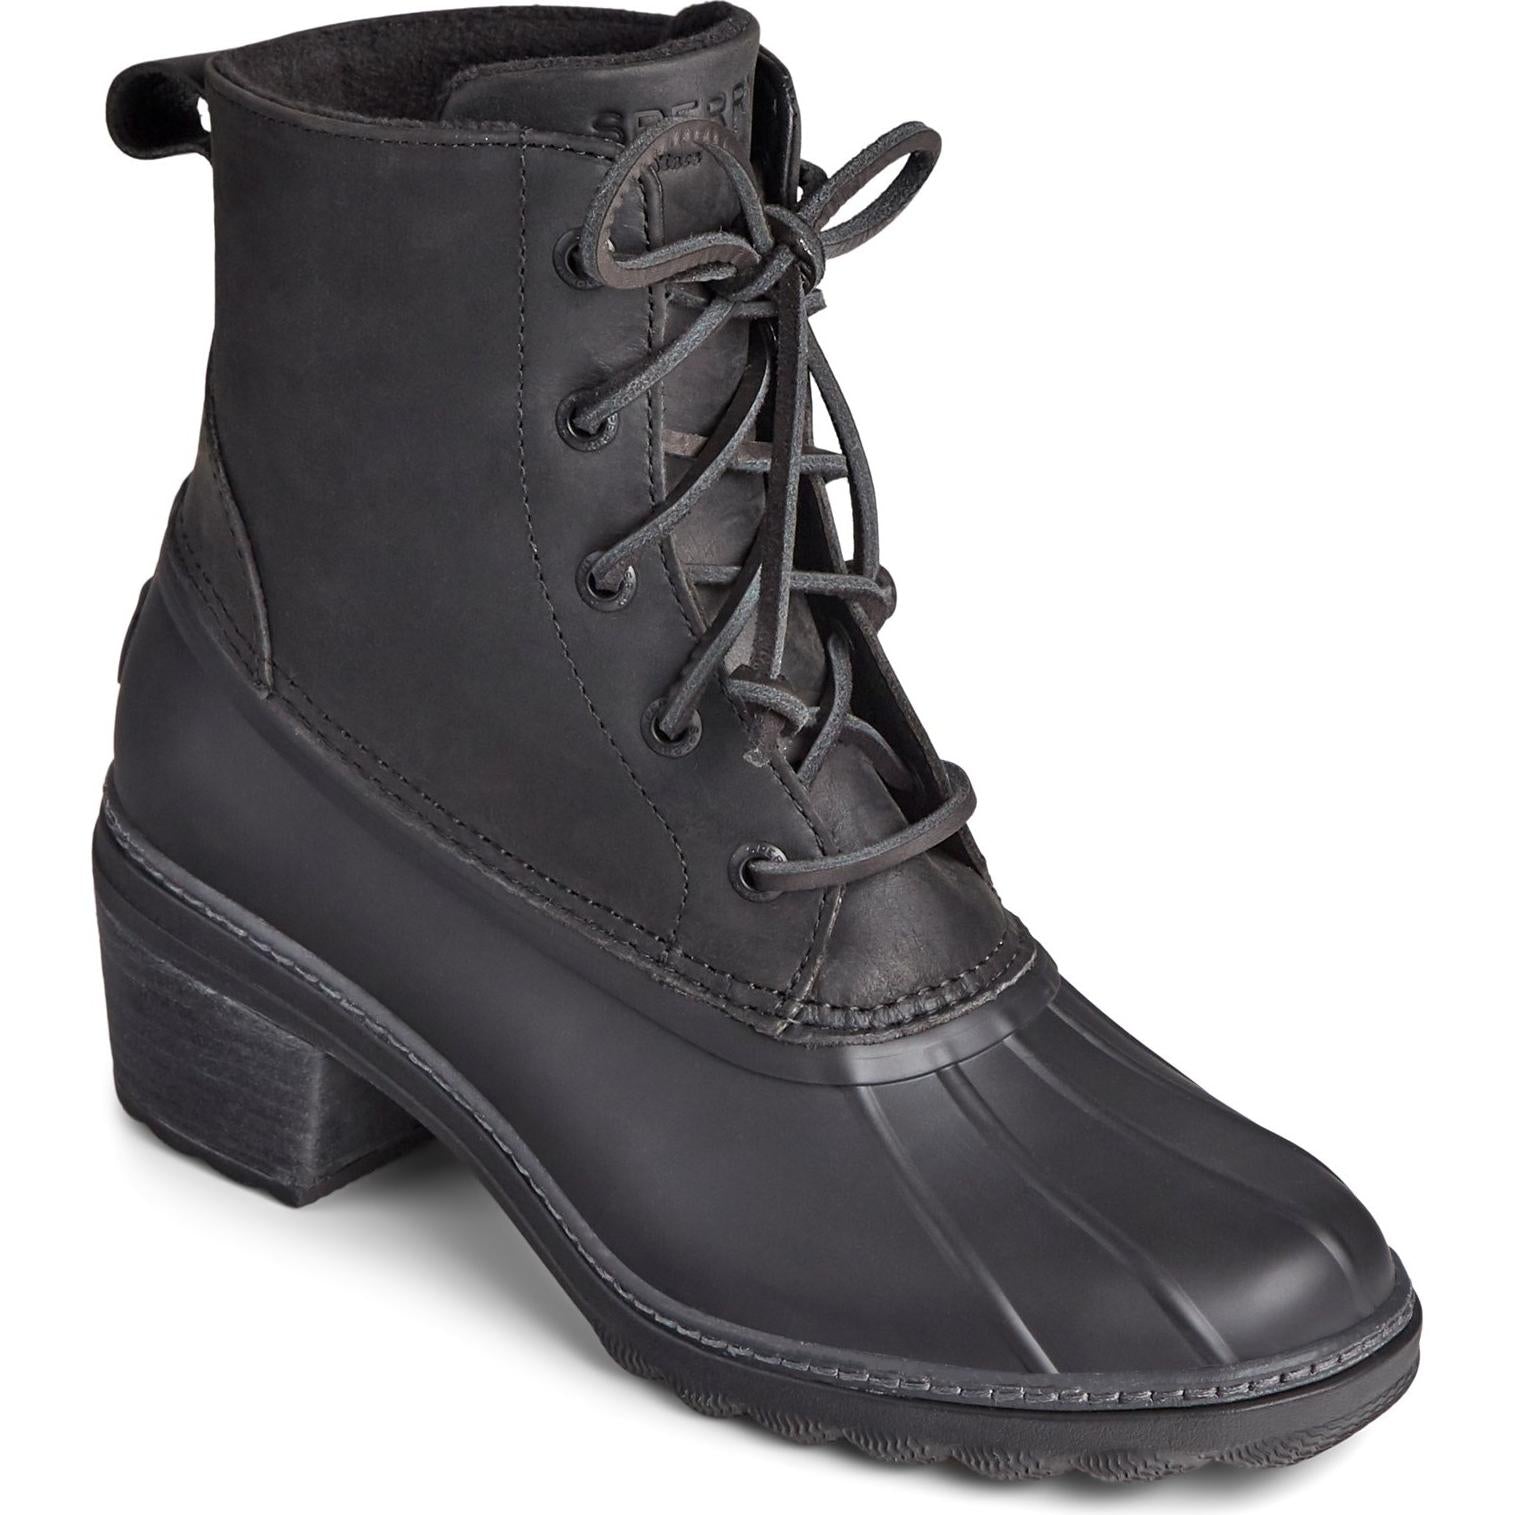 Sperry Top-sider Saltwater Heel Fashion Ankle Boots